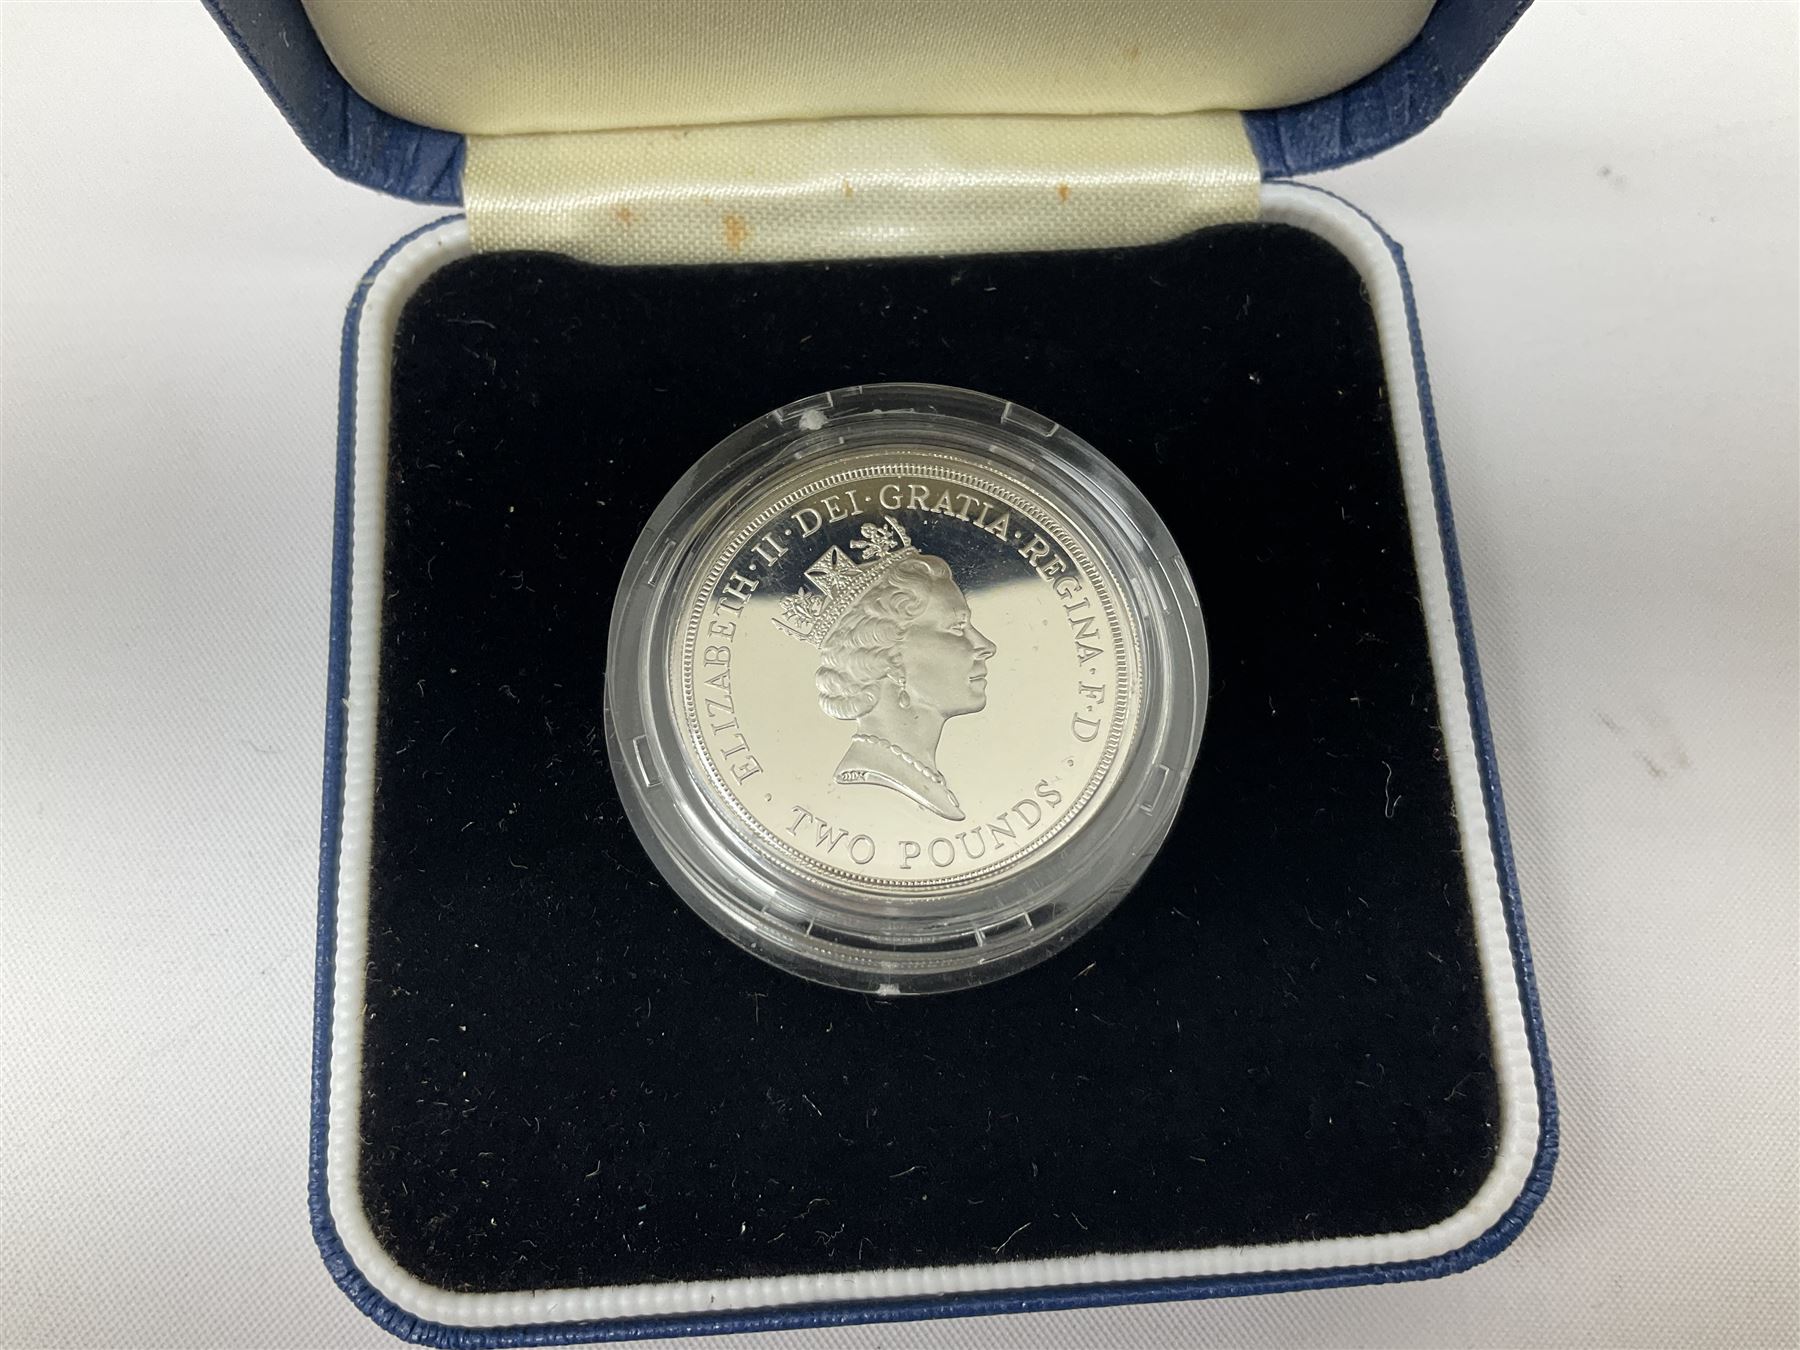 Four The Royal Mint United Kingdom silver proof coins - Image 7 of 9